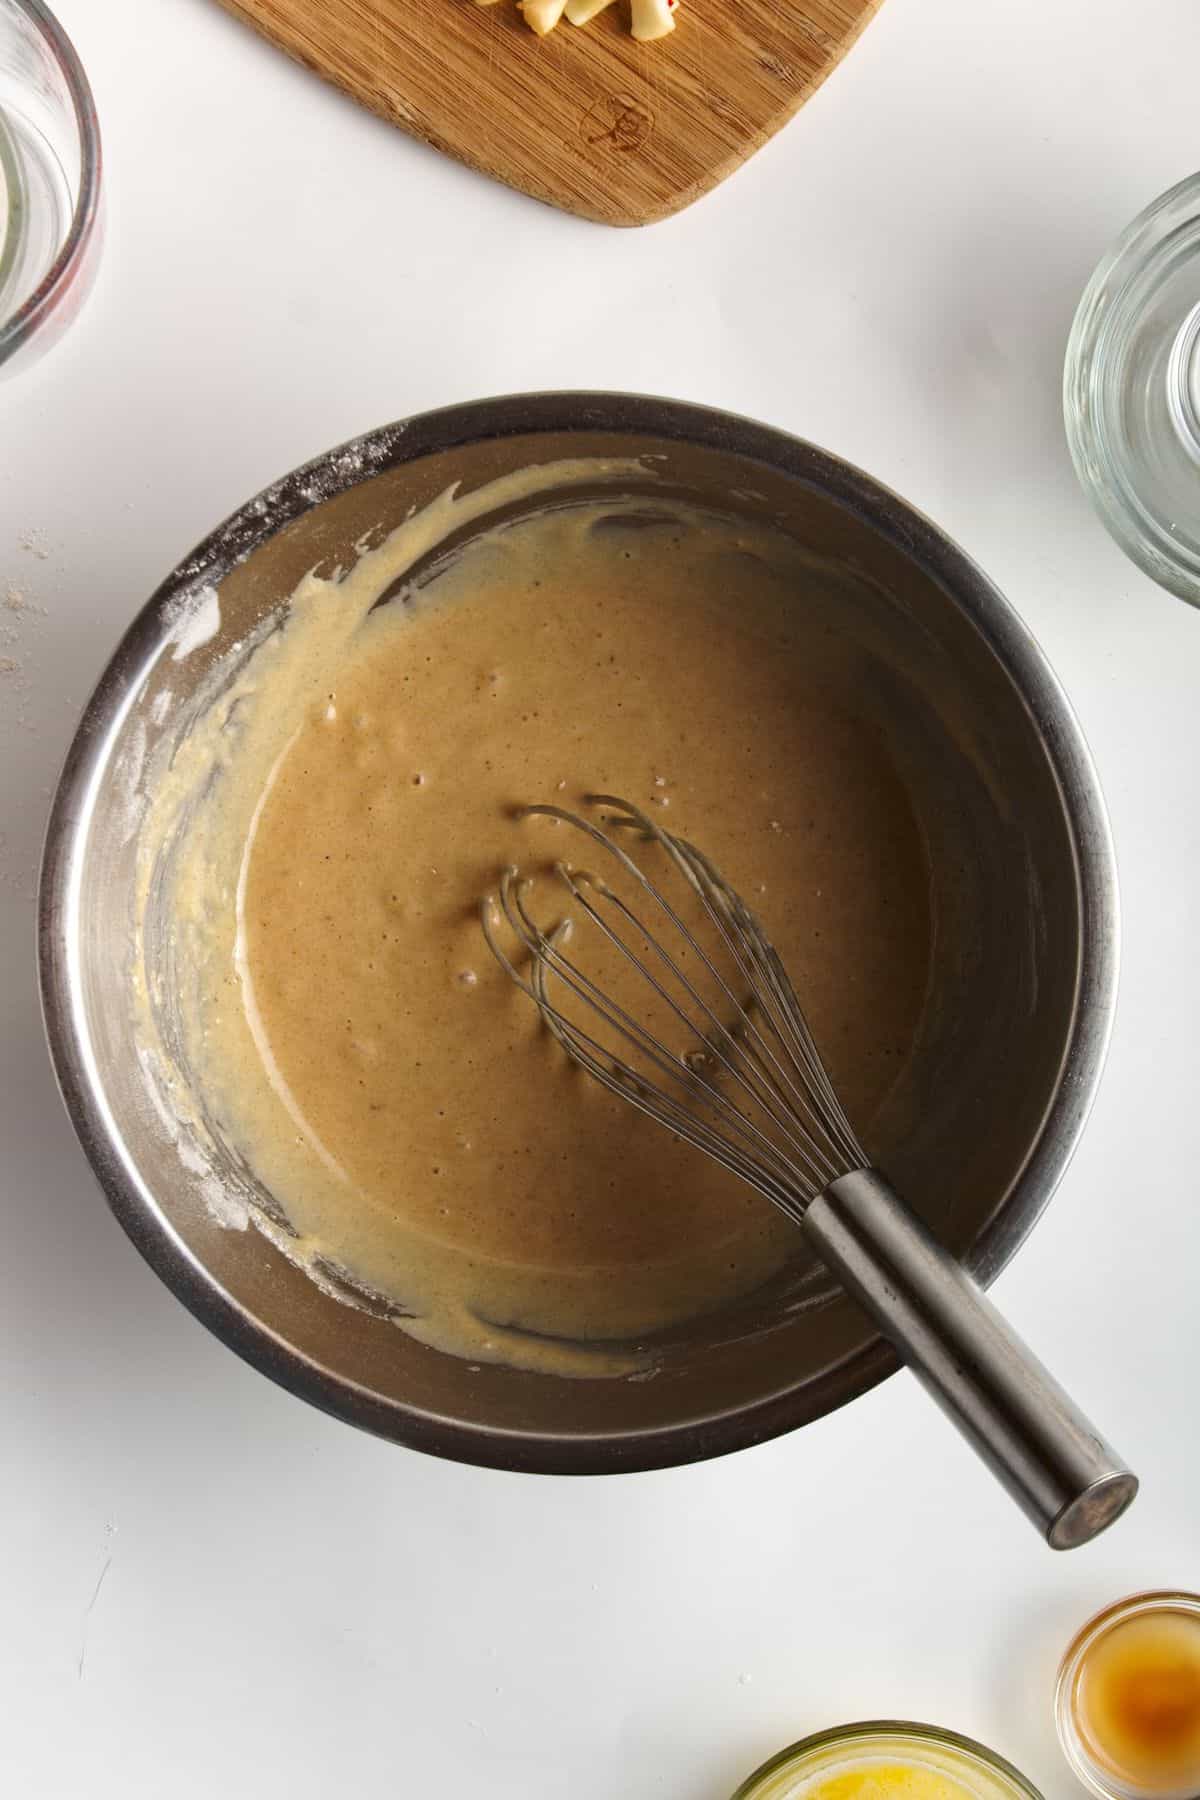 Batter in a stainless bowl.